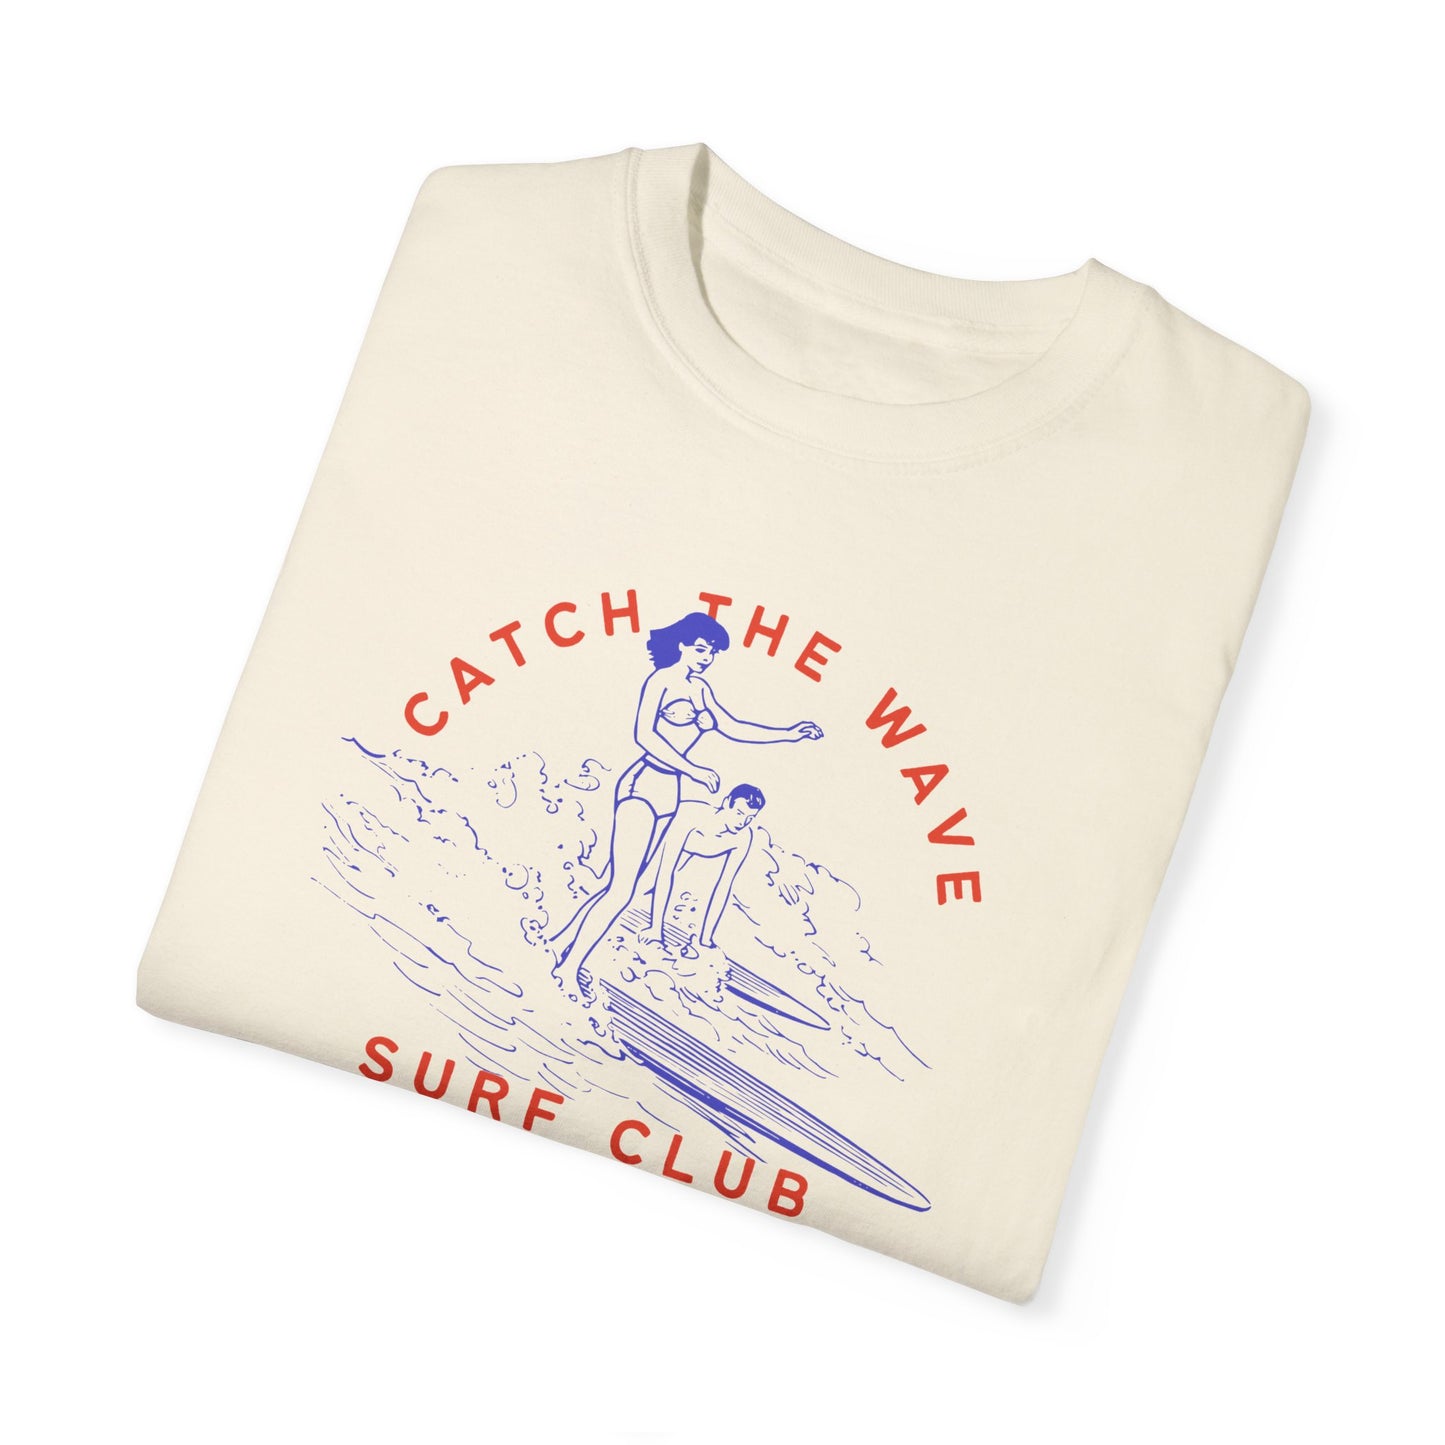 Catching Waves Surf Club T-Shirt - Comfort Colors 1717, 100% Ring-Spun Cotton, Relaxed Fit